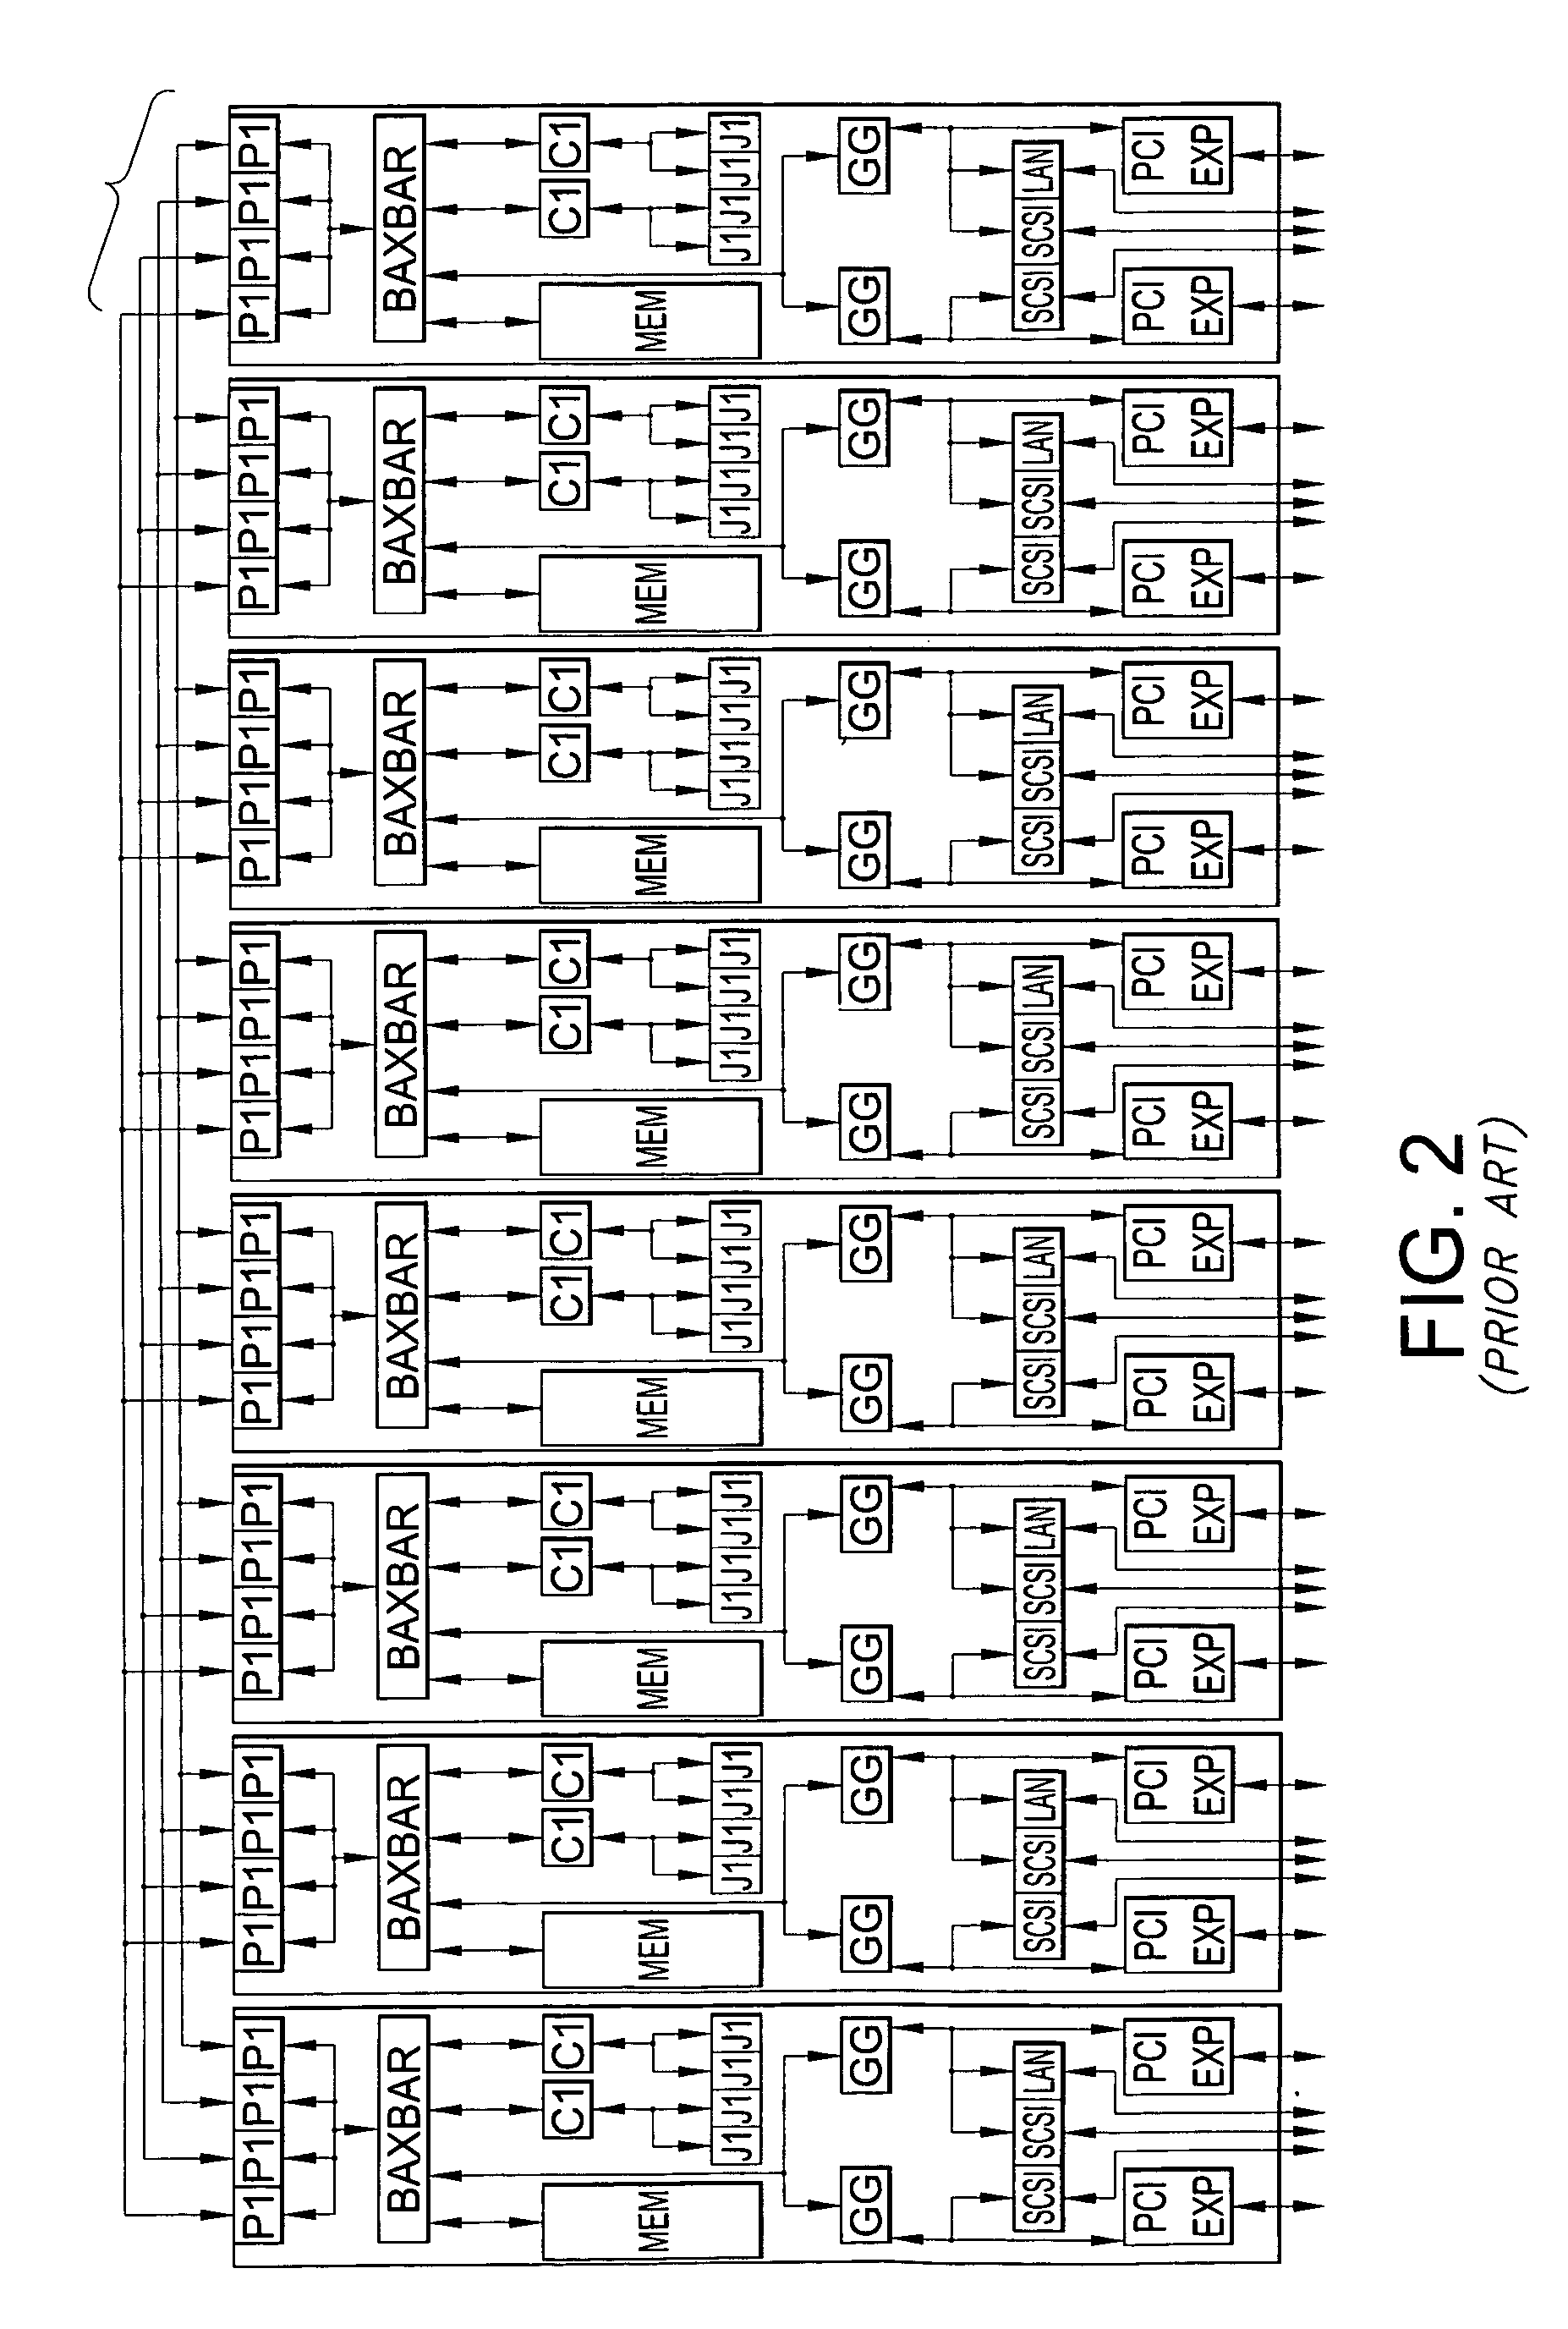 Method of reducing contention of a highly contended lock protecting multiple data items